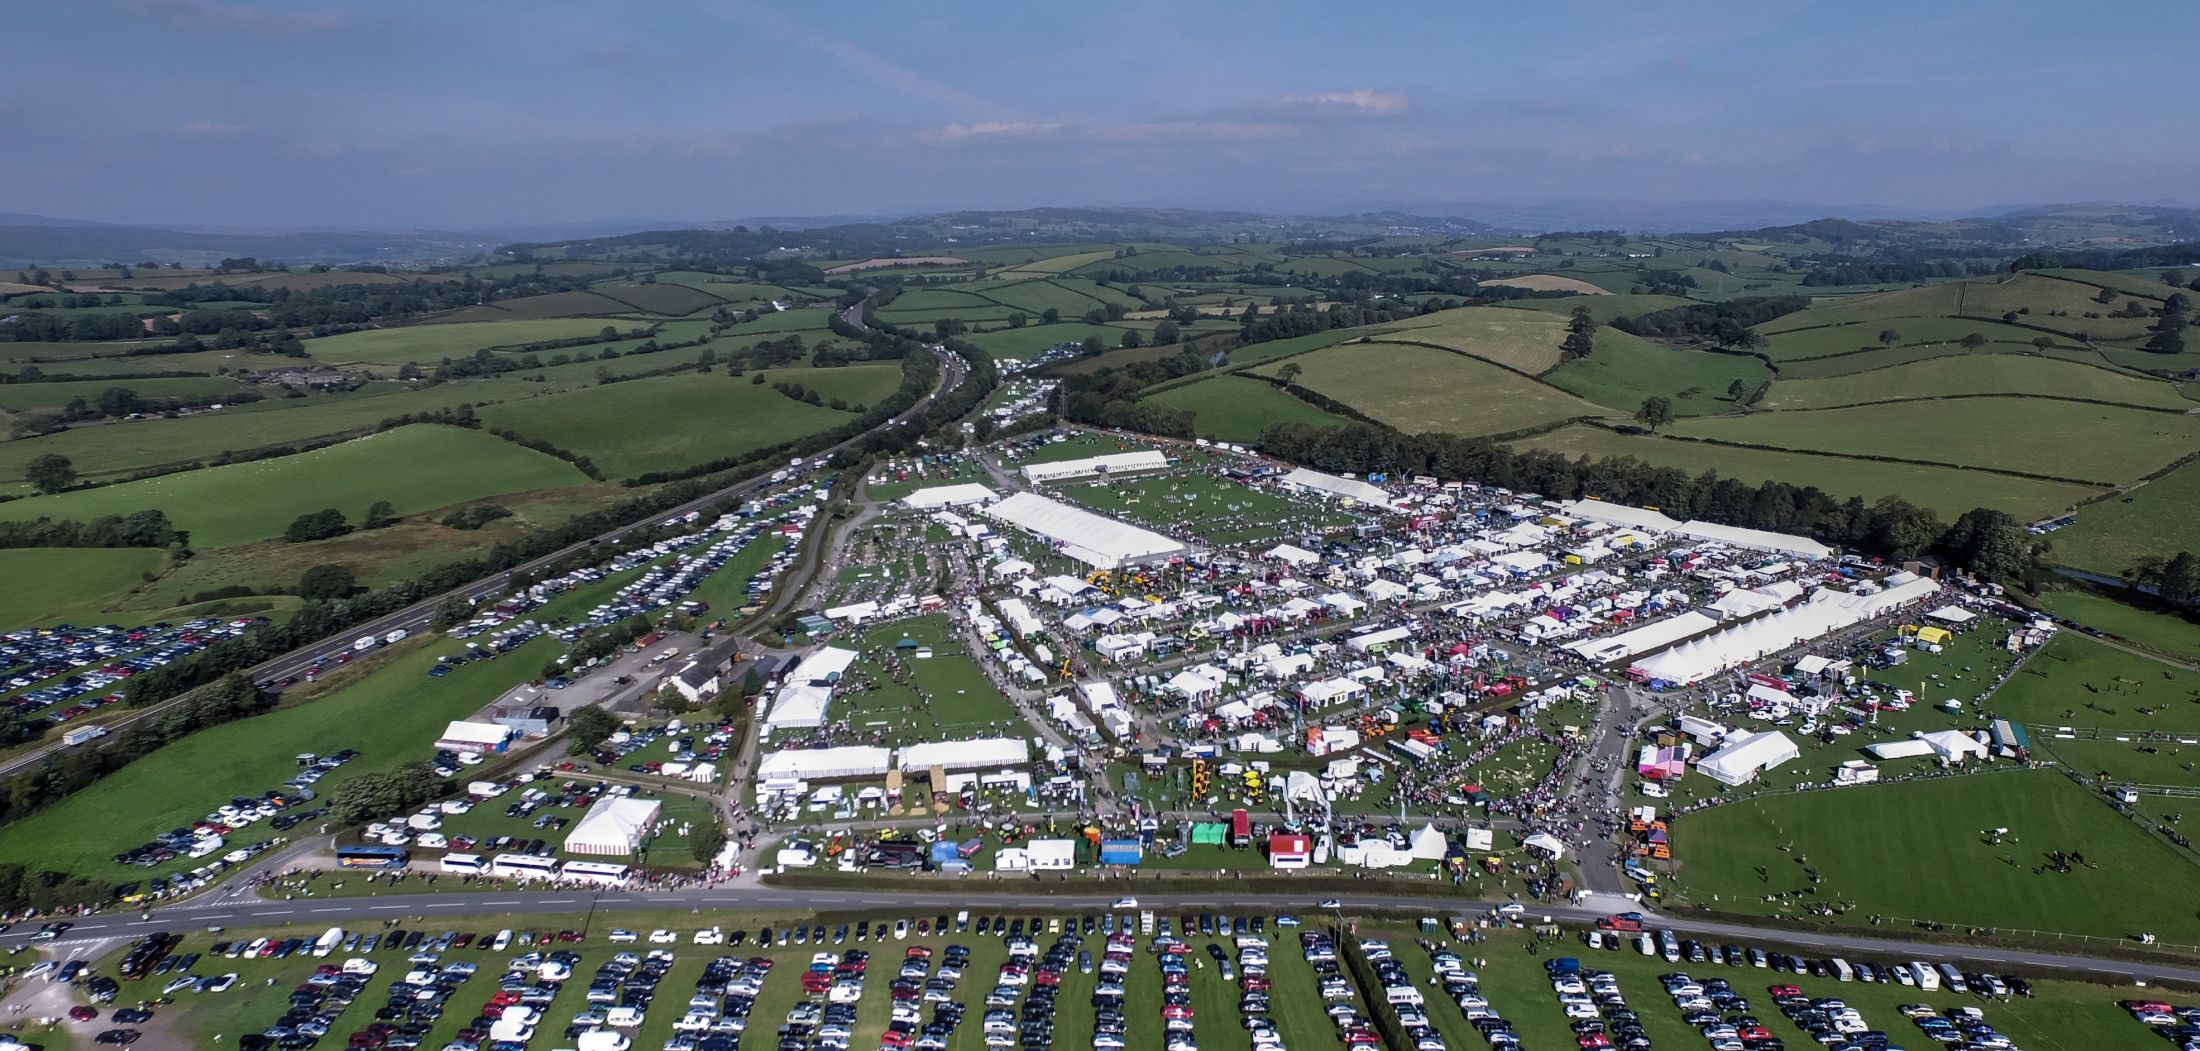 Westmorland County Show is Kendal's premier agricultural event